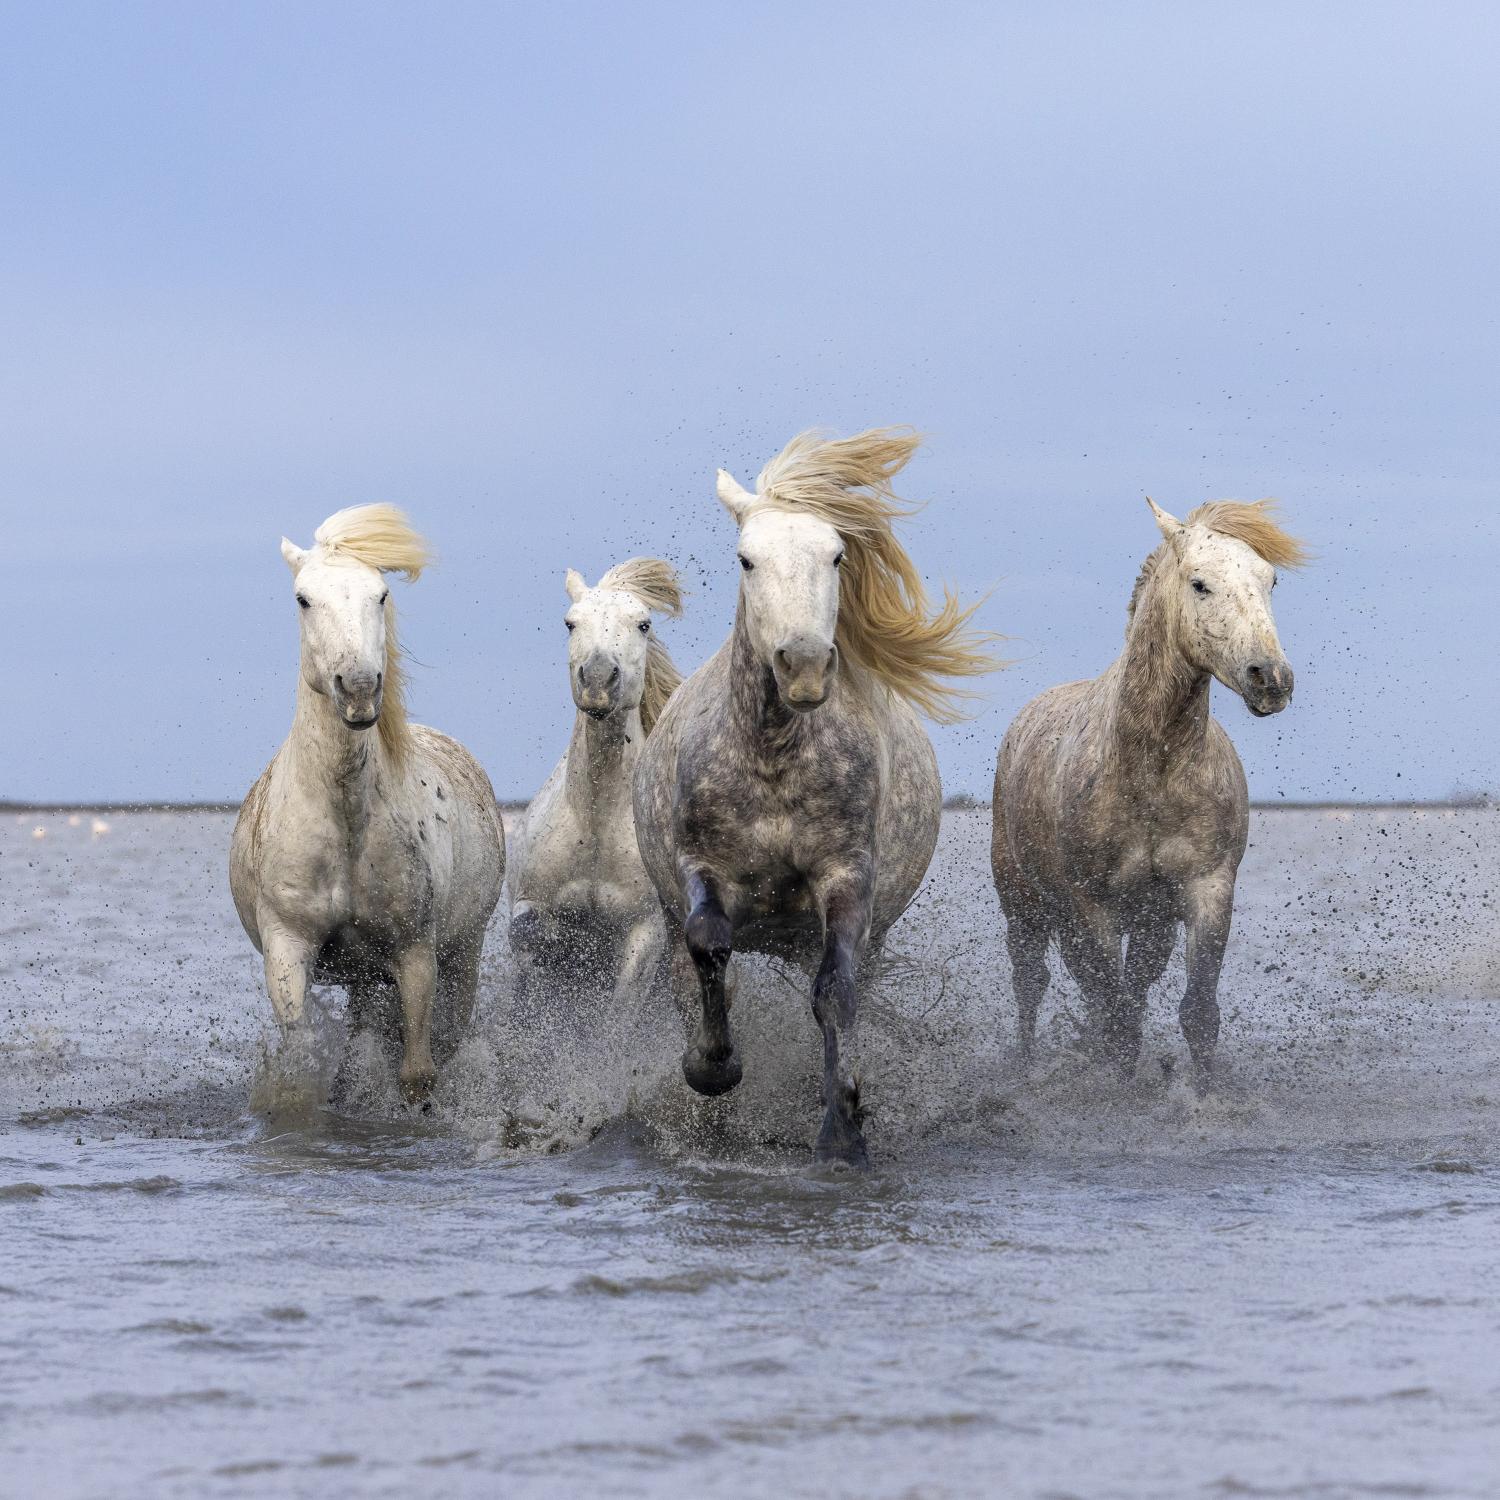 White horses running though a lake